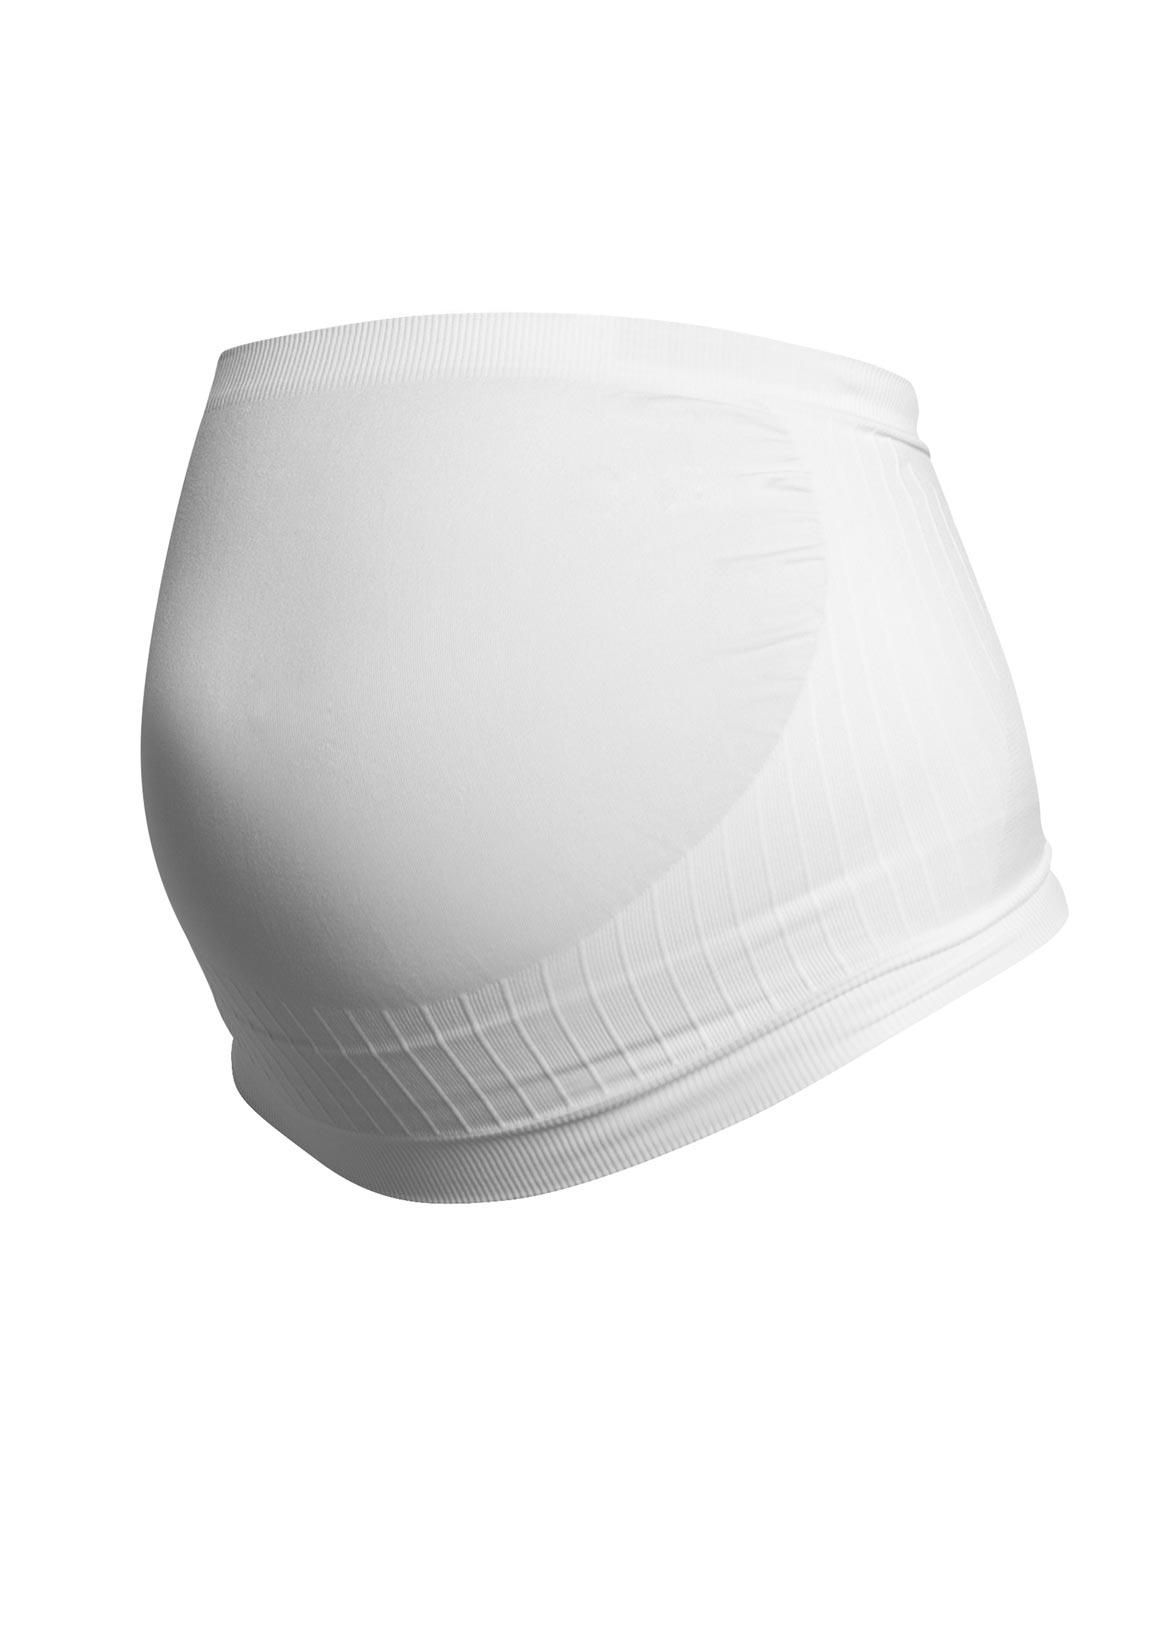 Carriwell Maternity Support Band White S Buy, Best Price in Oman, Muscat,  Salalah